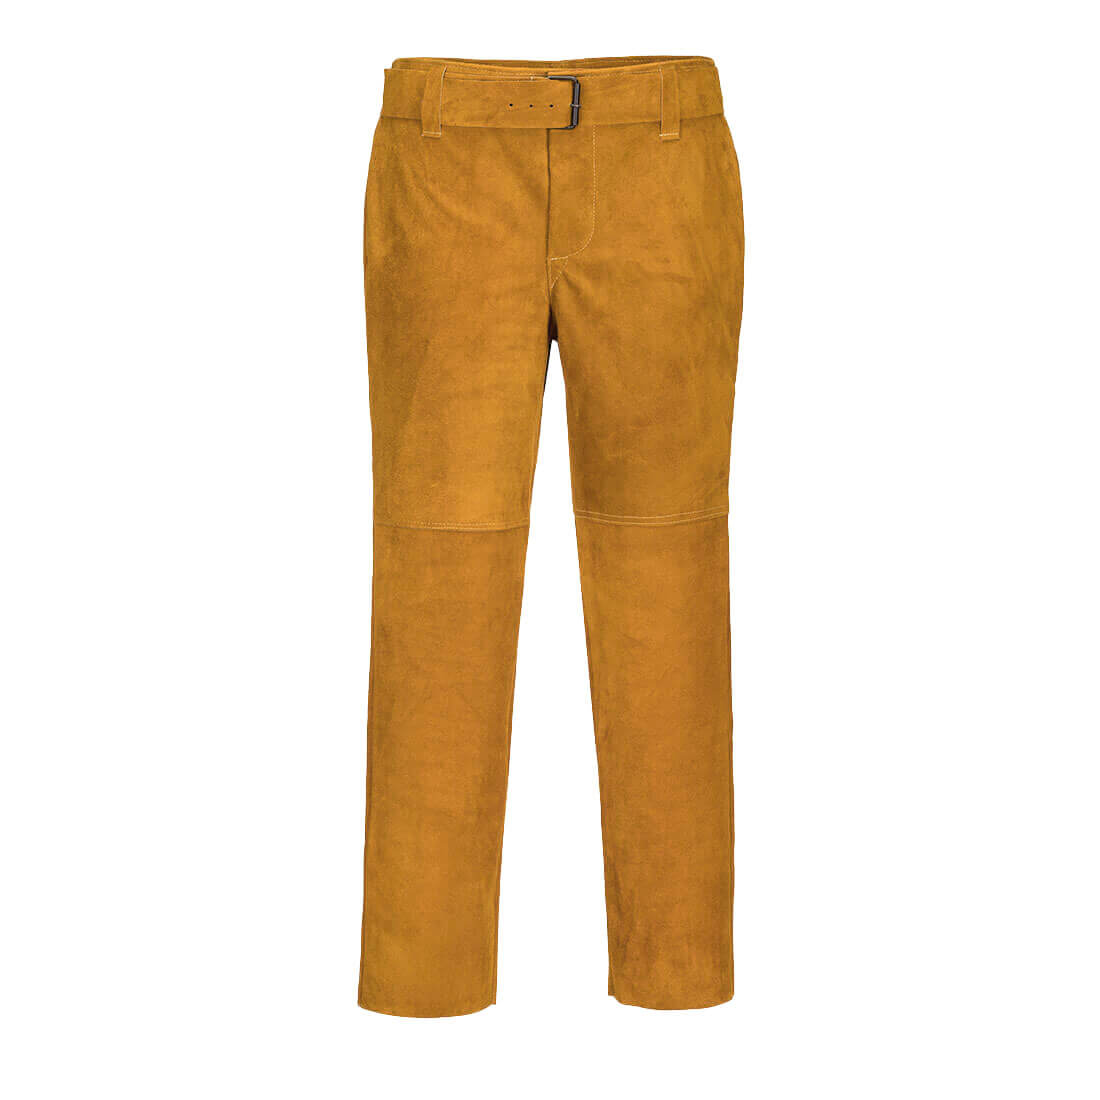 Leather Welding Trouser